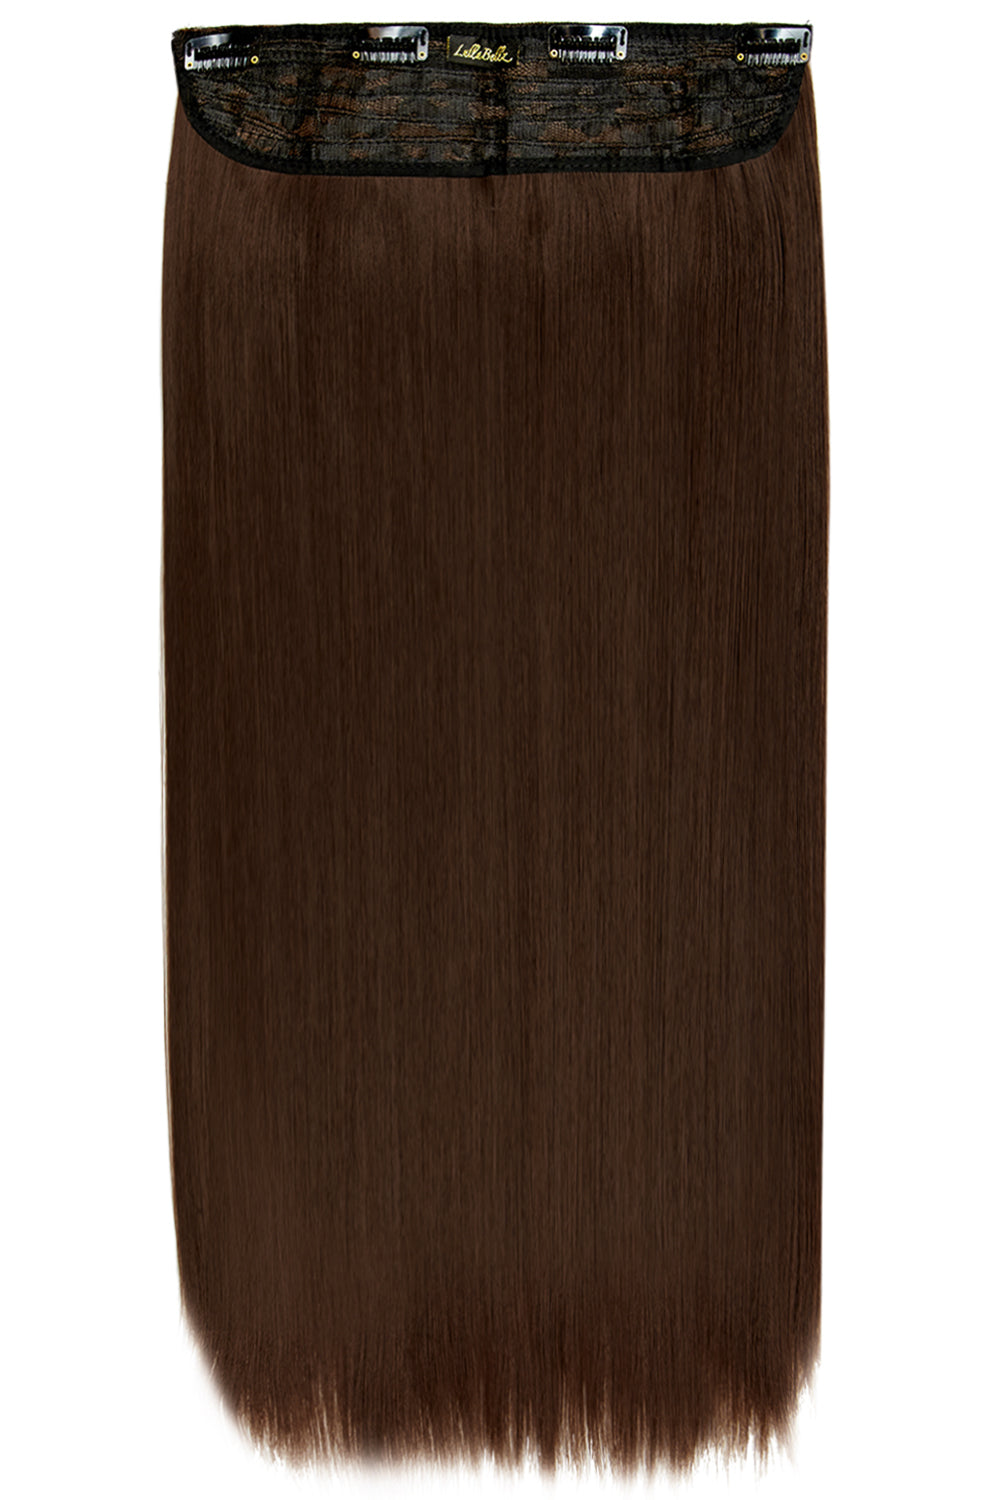 Thick 24" 1 Piece Straight Clip In Hair Extensions - Golden Brown